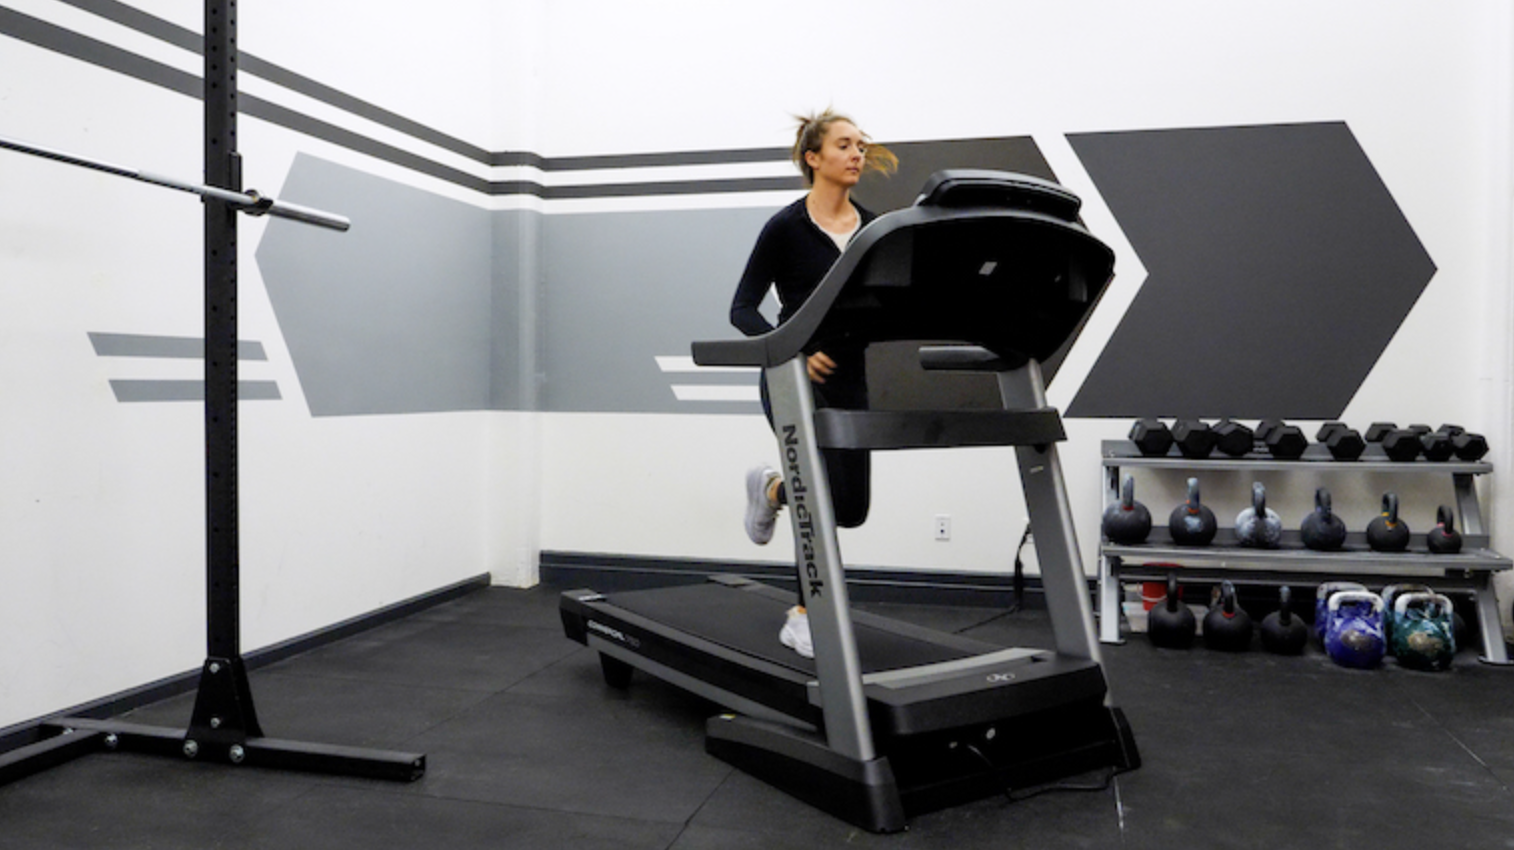 A person in a black long-sleeve shirt runs on a NordicTrack treadmill, set inside a gym. There is a squat rack with a barbell loaded on it in the corner and a rack of dumbbells and kettlebells behind the treadmill.